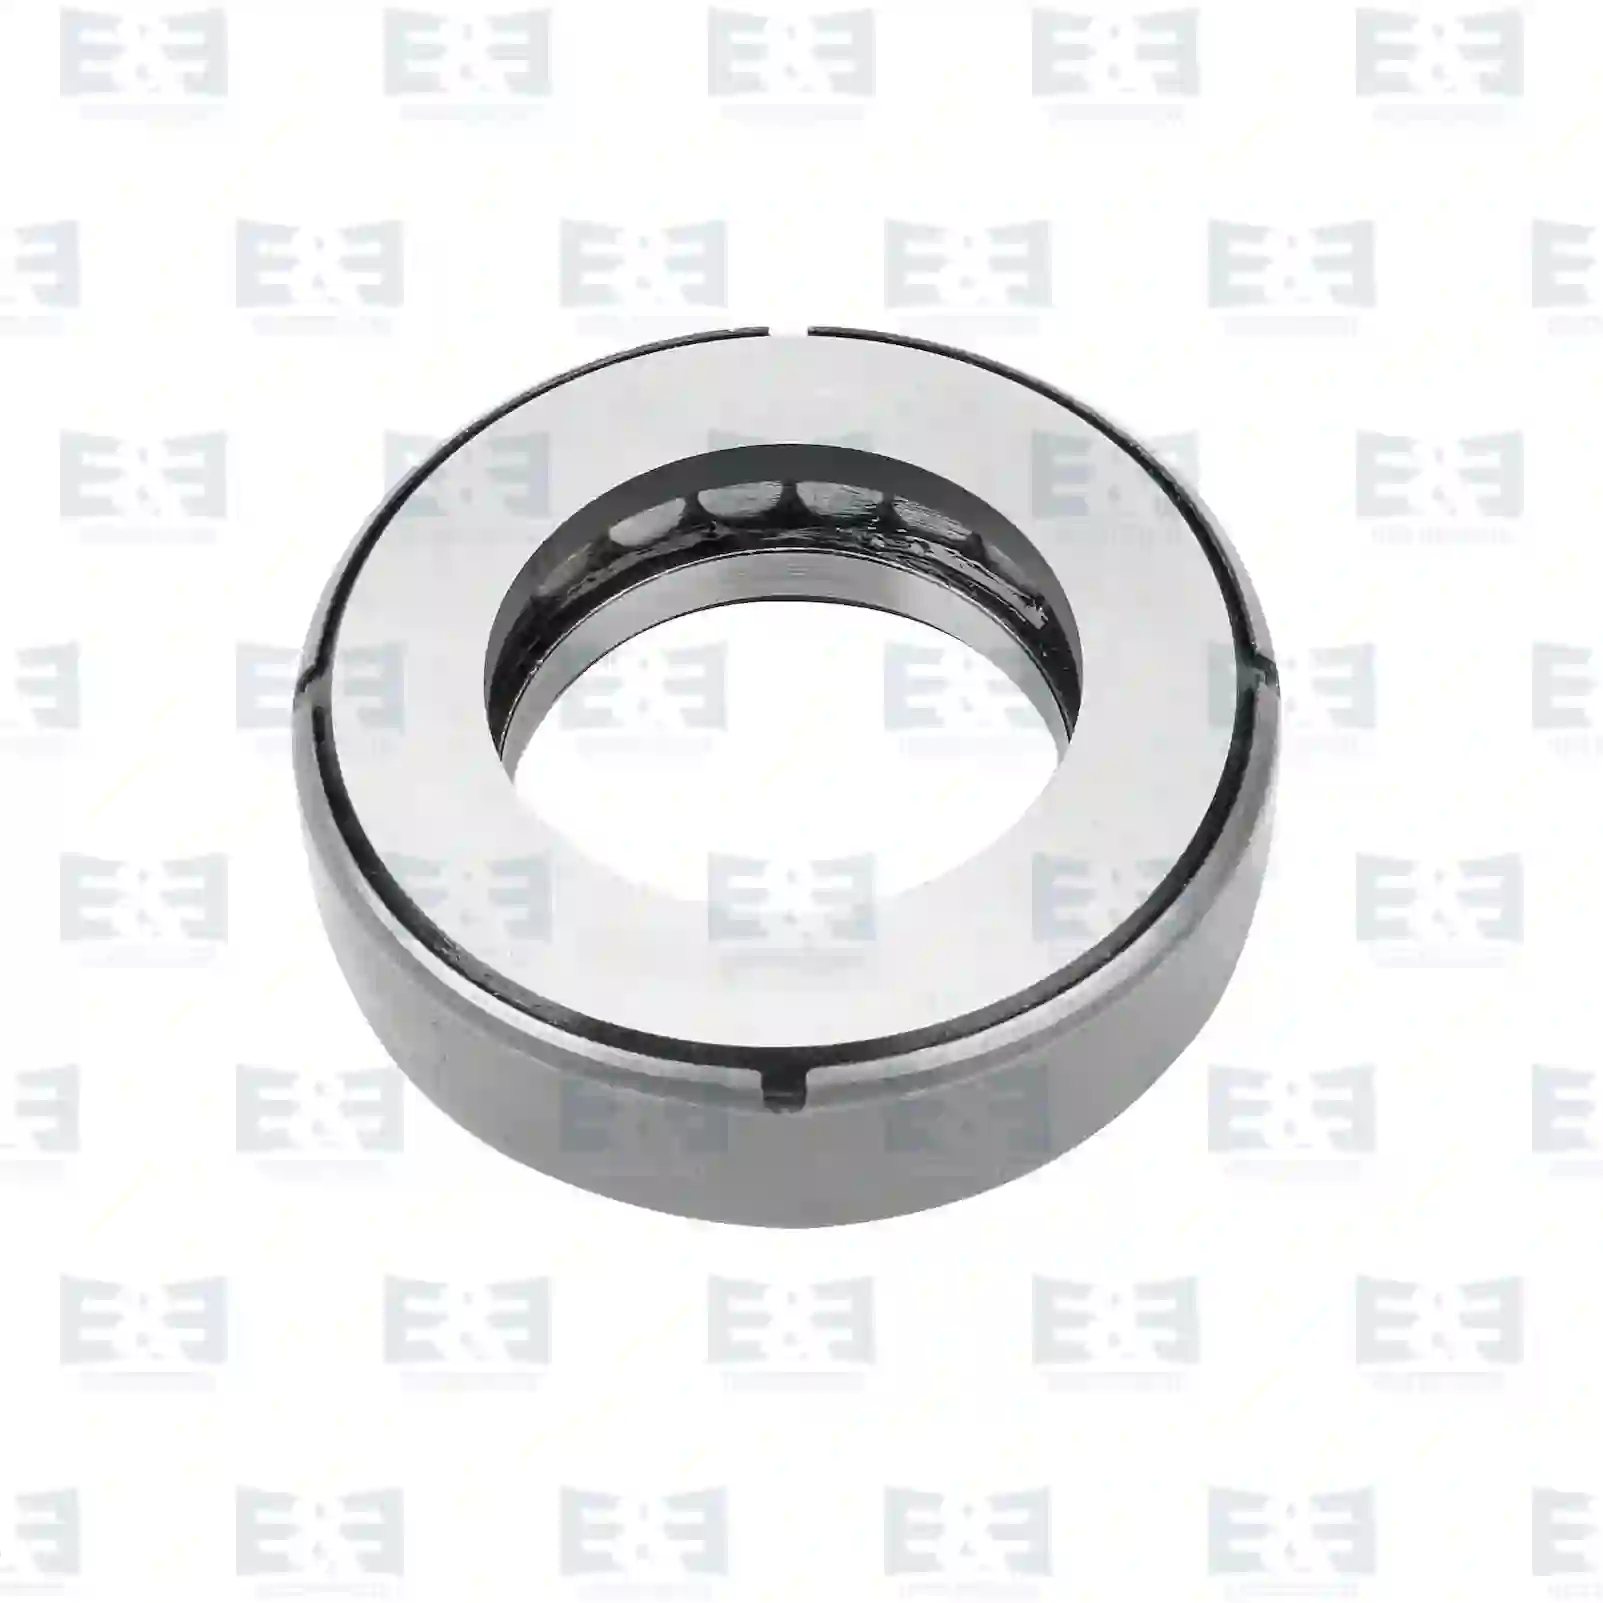  Roller bearing || E&E Truck Spare Parts | Truck Spare Parts, Auotomotive Spare Parts